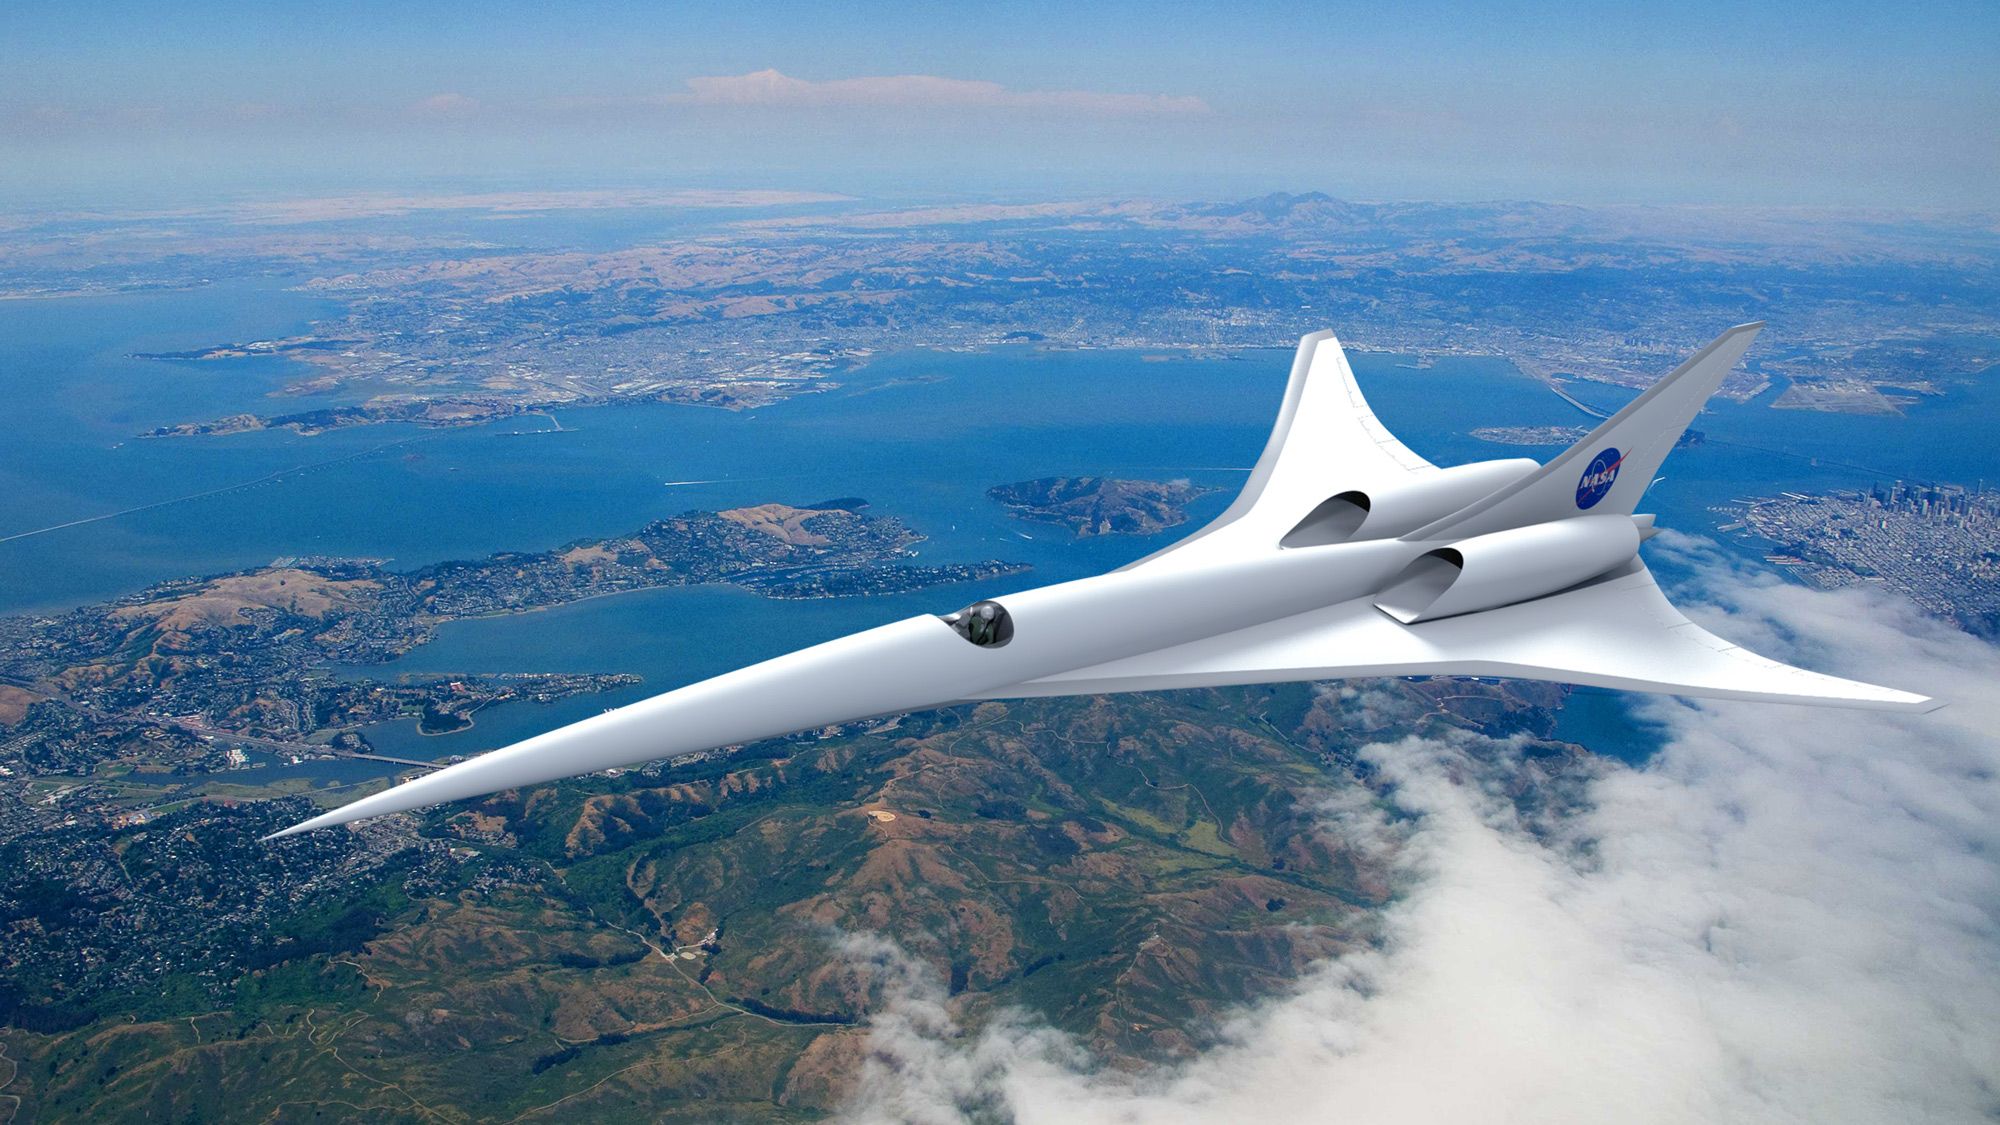 NASA is investing in eco-friendly supersonic airplane travel — Quartz